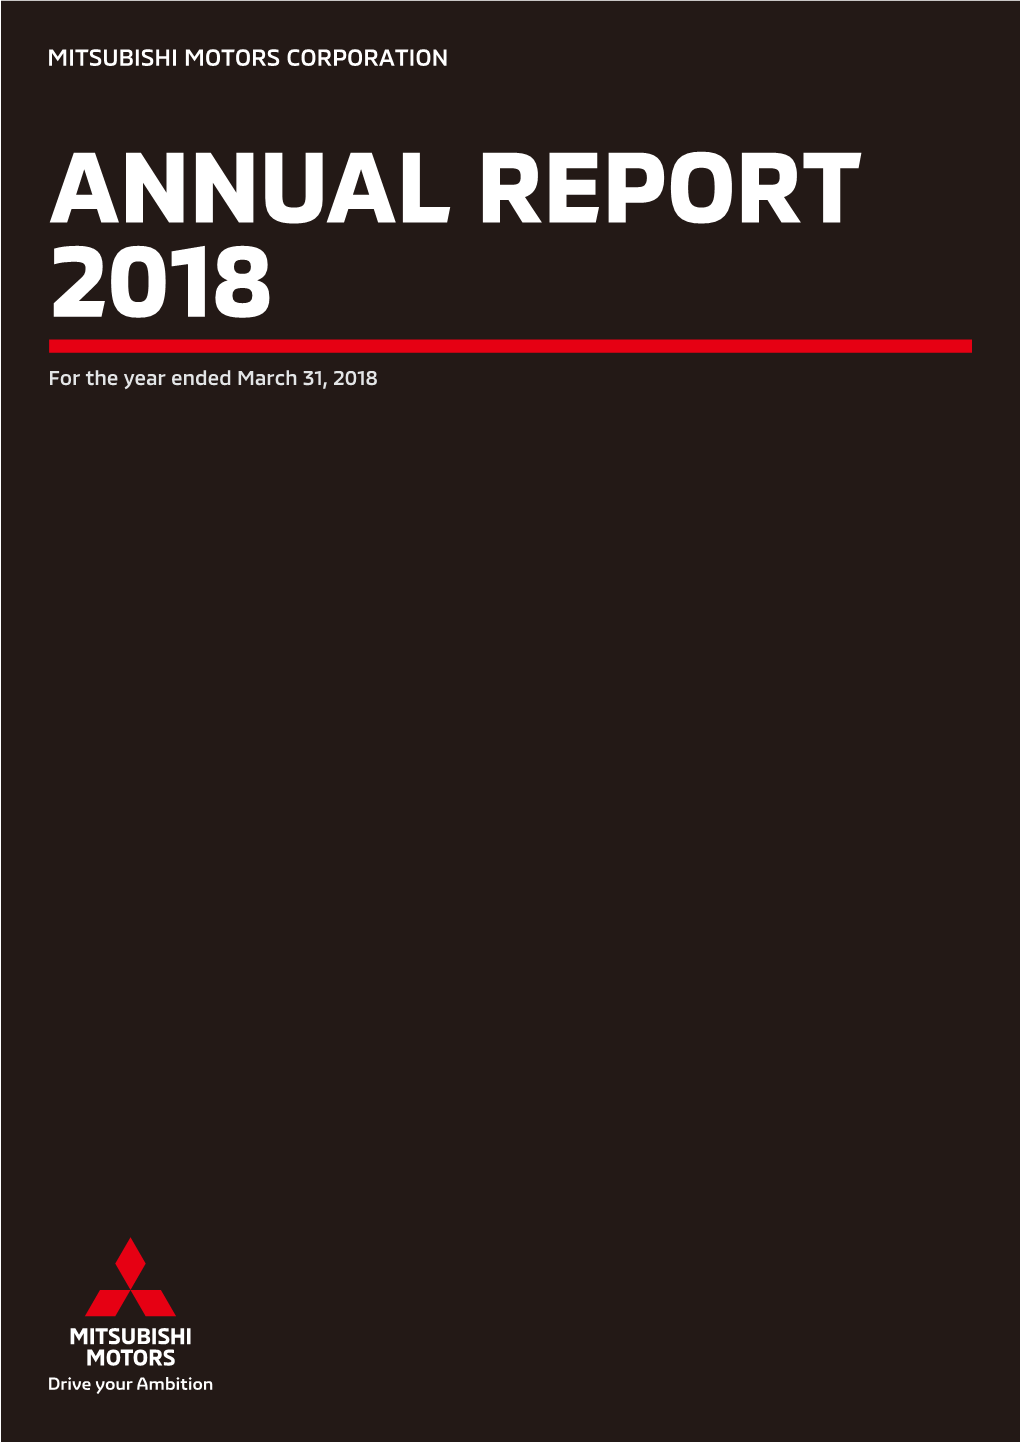 Annual Report 2018(2.36MB)